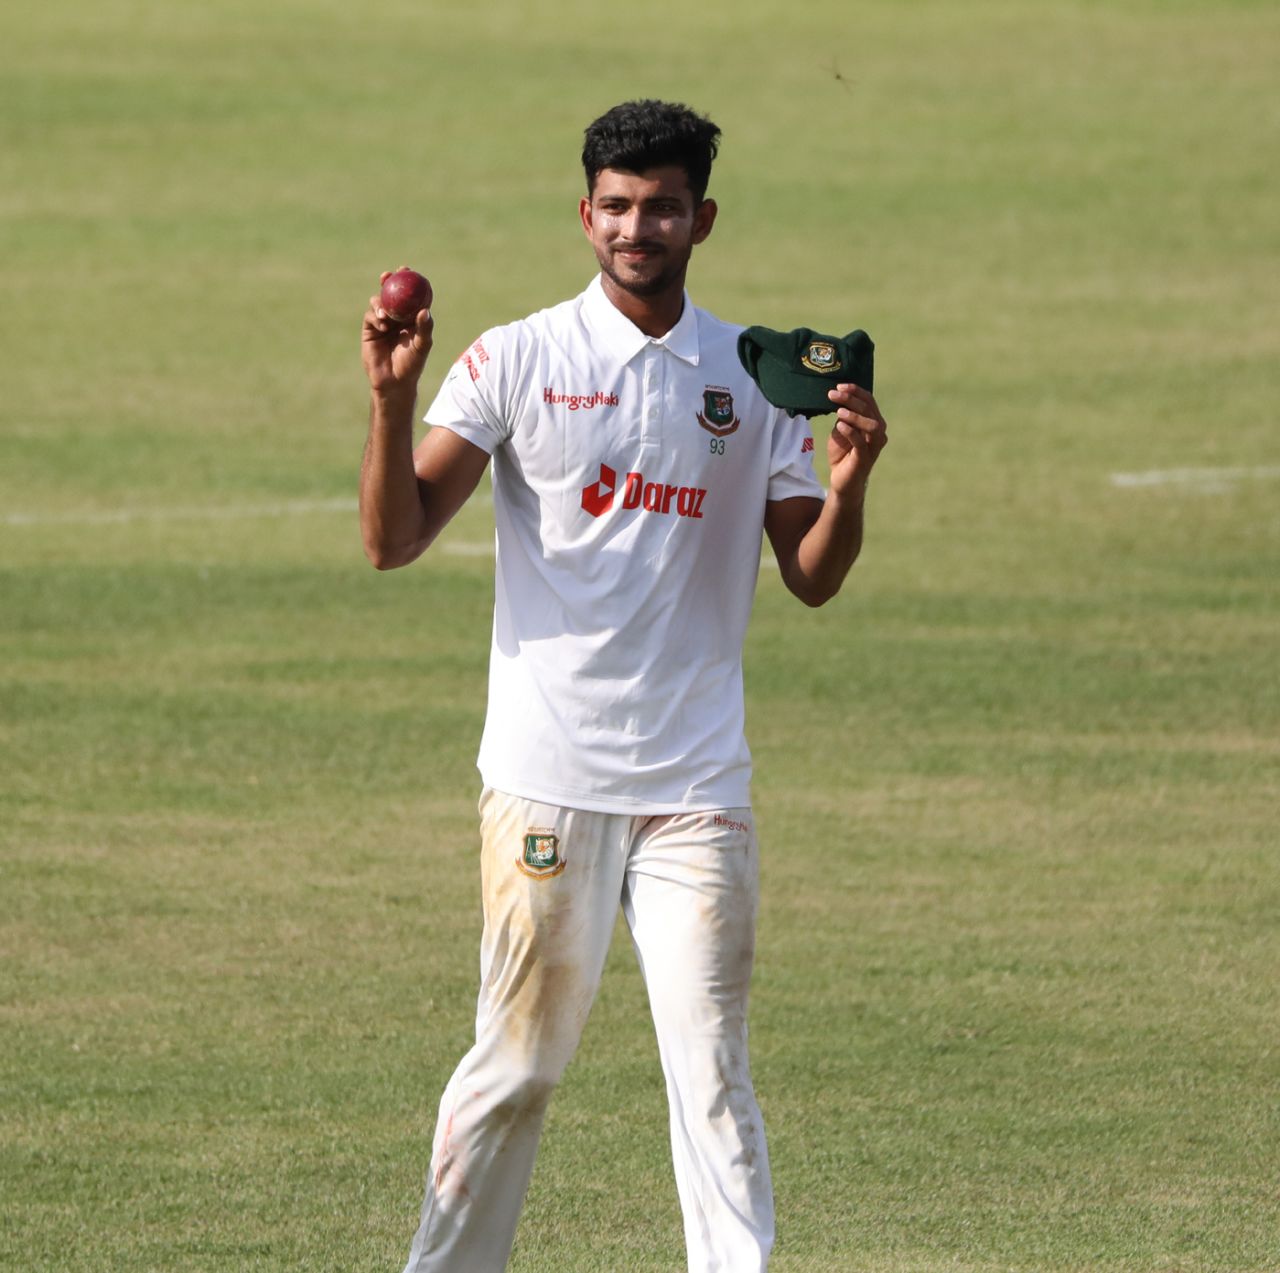 Nayeem Hasan picked up his career-best figures of 6 for 105, Bangladesh vs Sri Lanka, 1st Test, Chattogram, 2nd day, May 16, 2022